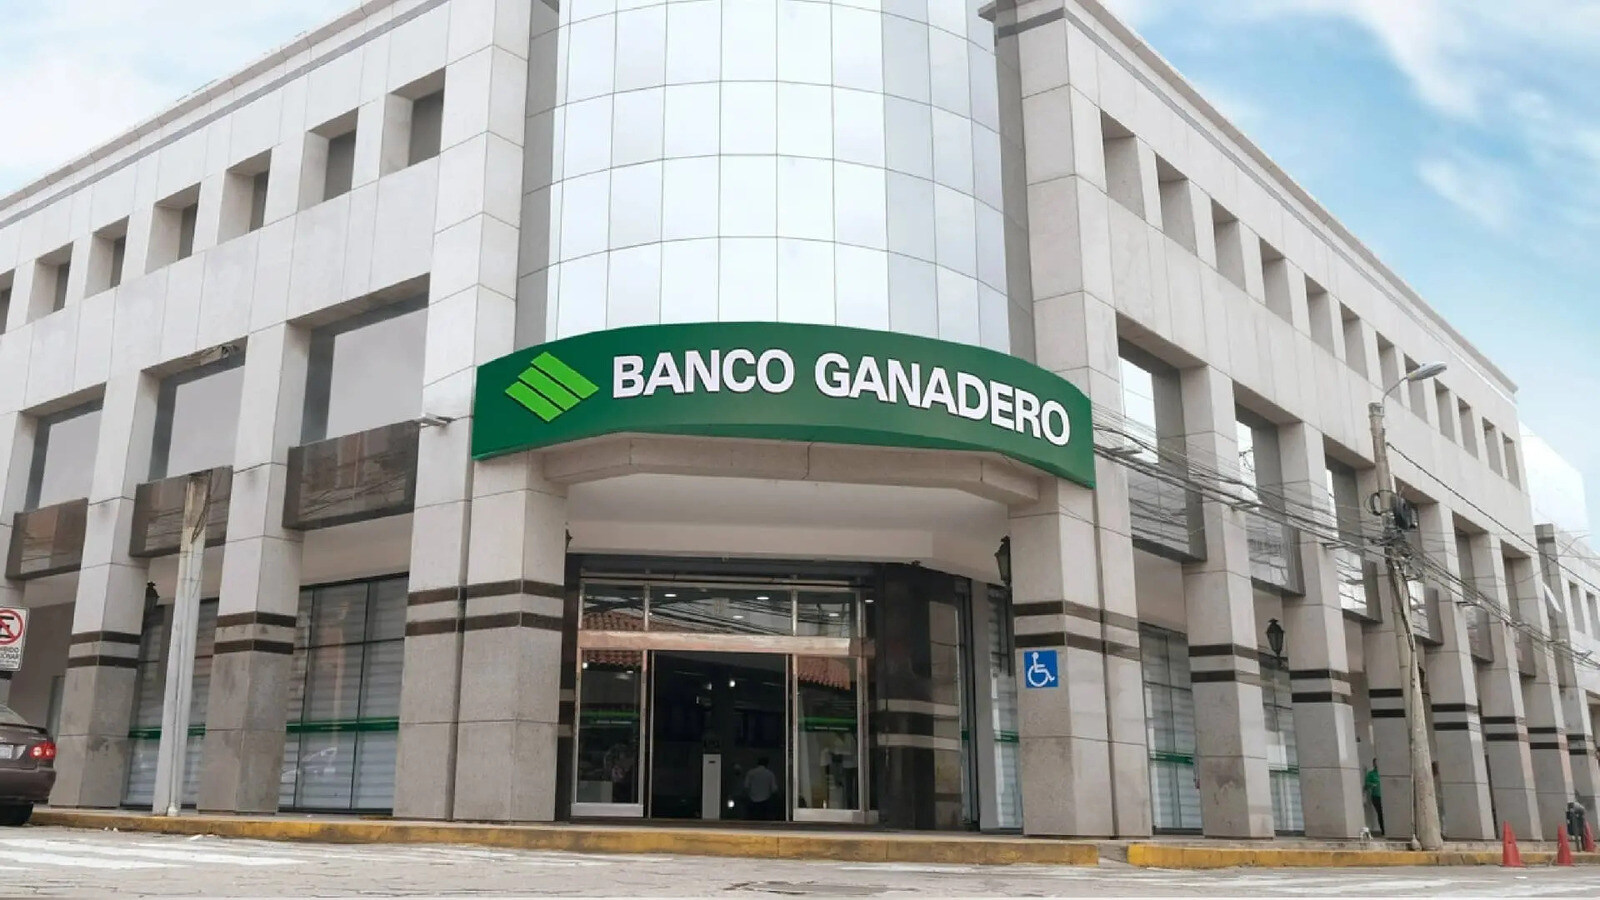 10-intriguing-facts-about-banco-ganadero